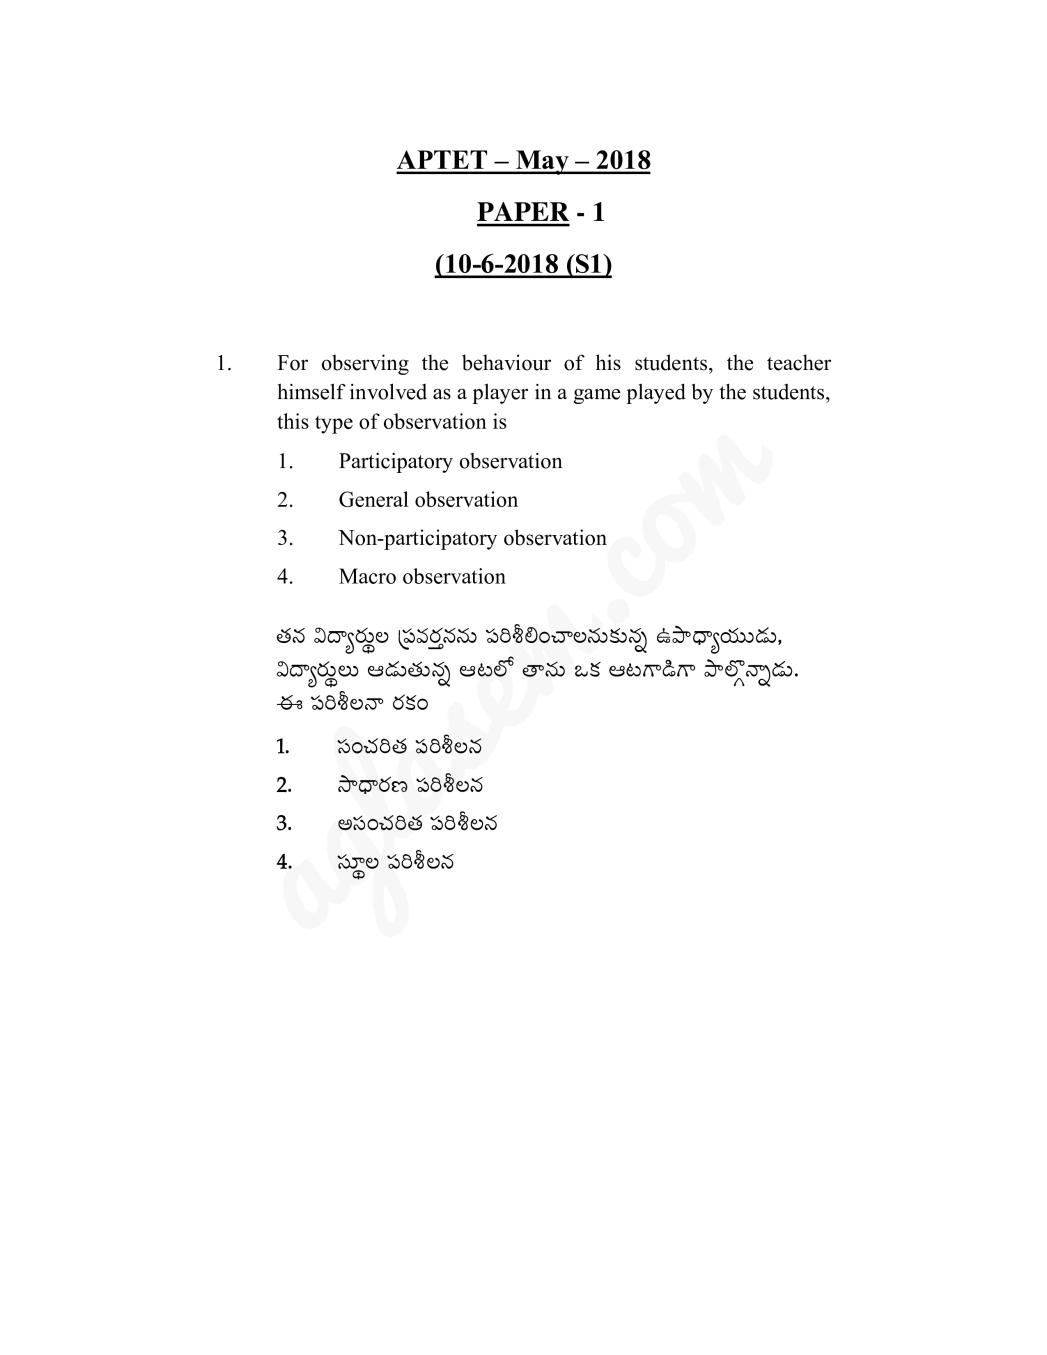 APTET Question Paper with Answers 10 Jun 2018 Paper 1 (Shift 1) - Page 1